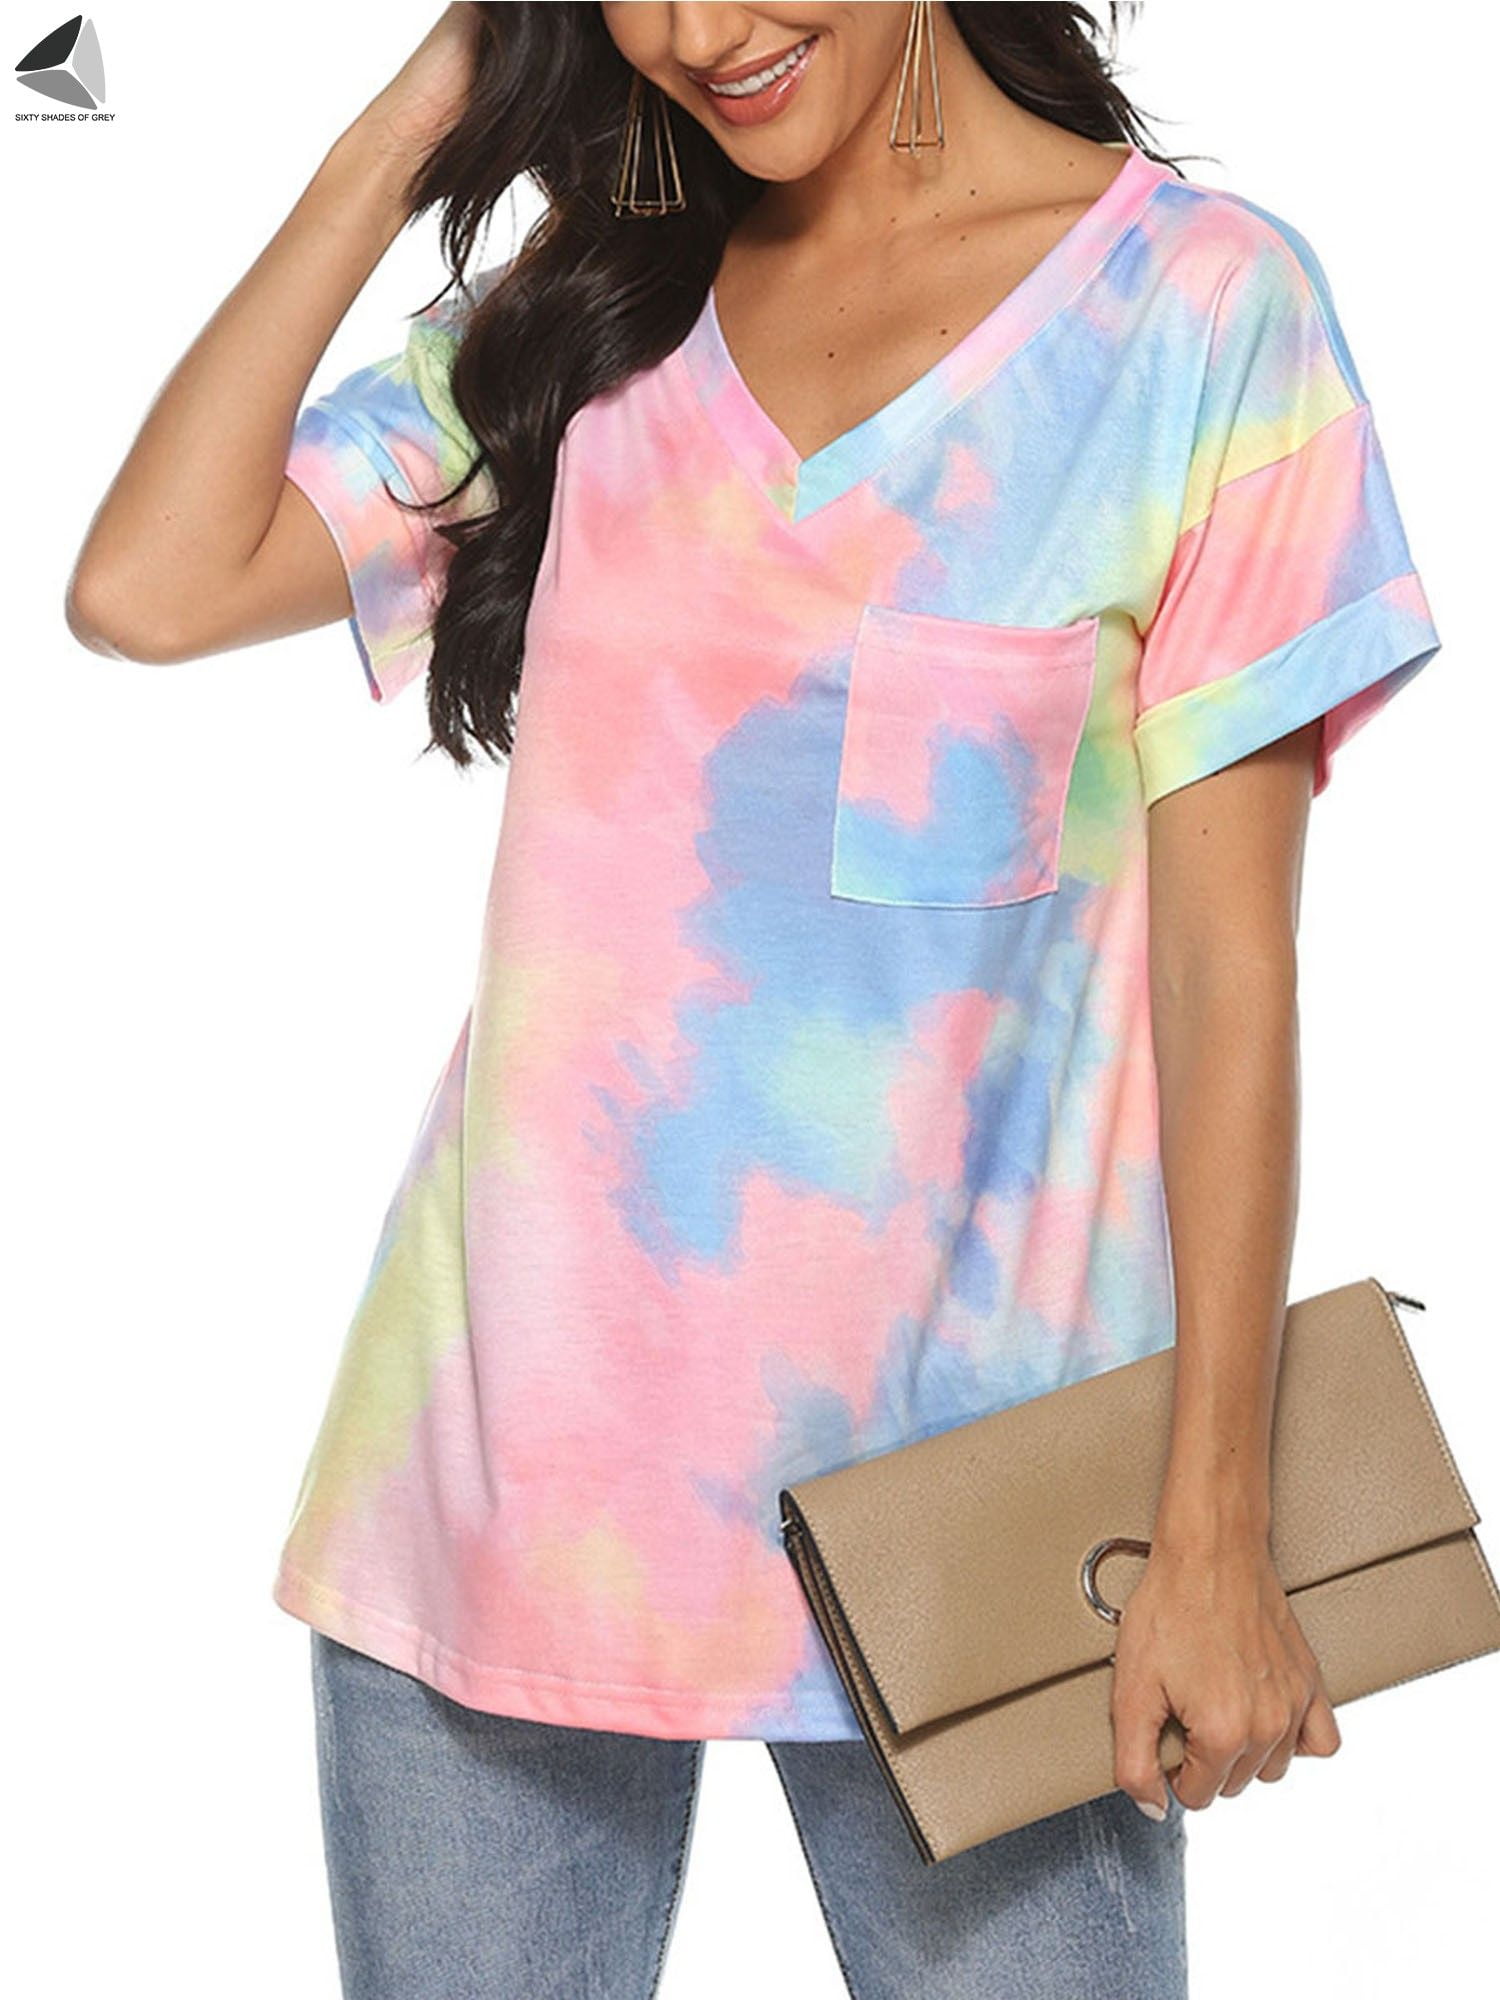 Womens V-Neck T Shirts Summer Tie-Dyed Print Casual Short Sleeve T Shirts Tops Blouse Tees by Gyouanime 